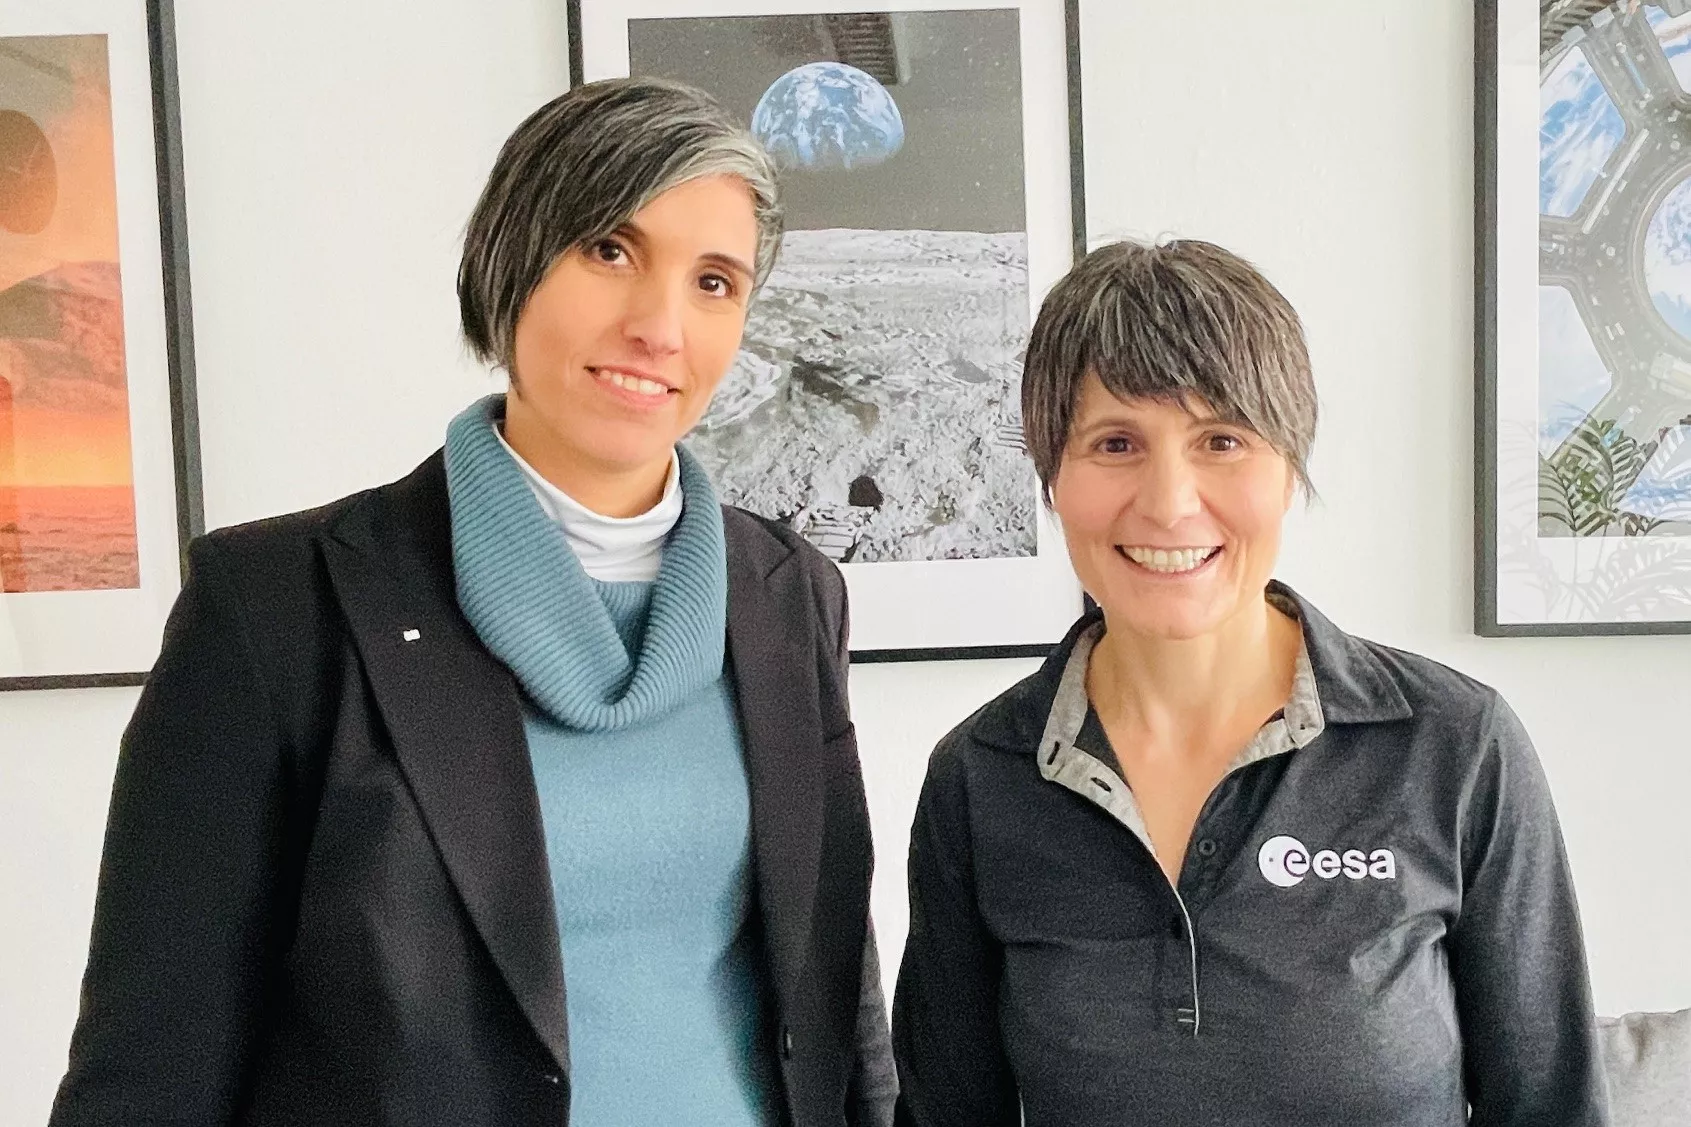 Prof. Gisela Detrell (left), TUM Chair of Human Spaceflight Technology, was delighted with the visit and the lecture by Samantha Cristoforetti. Image: Cornelia Freund / TUM